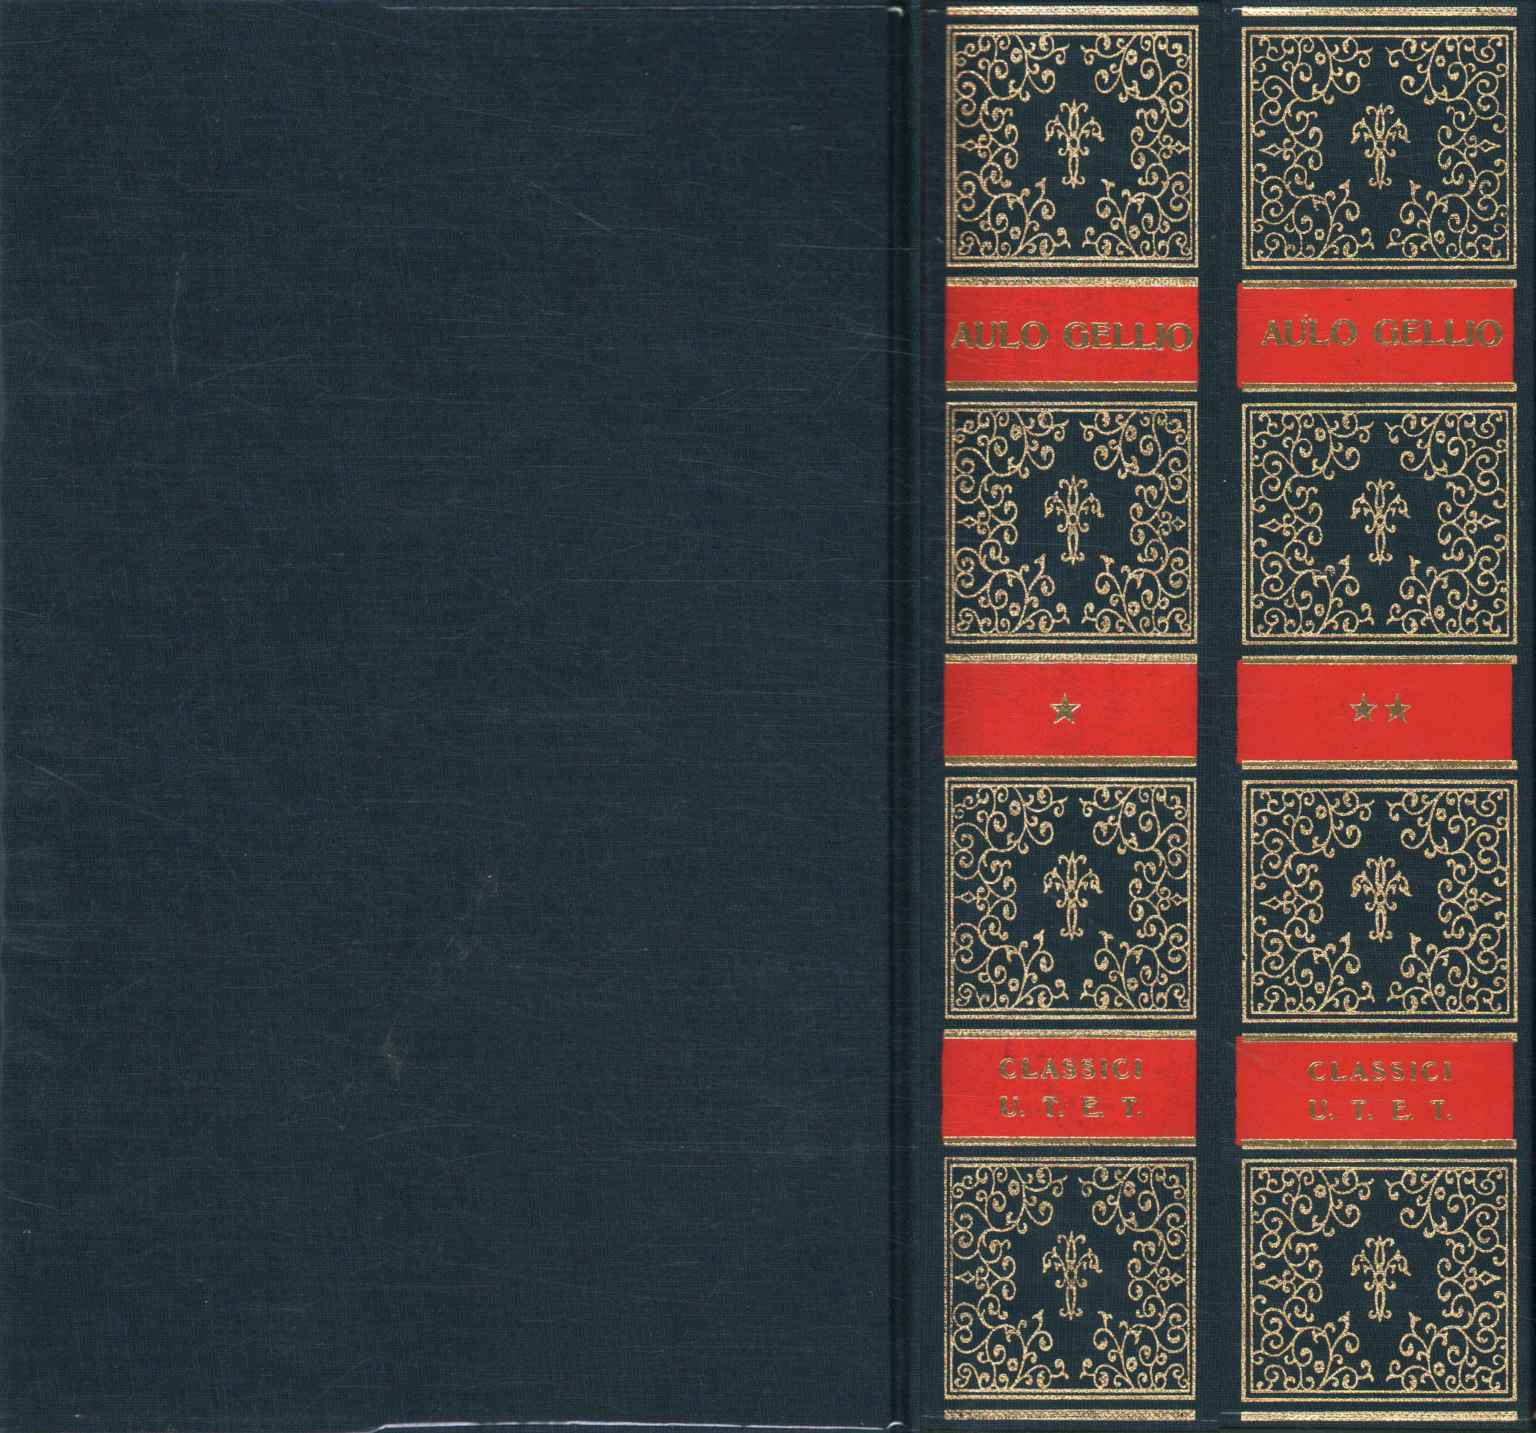 Nuits Anciennes (2 Volumes)